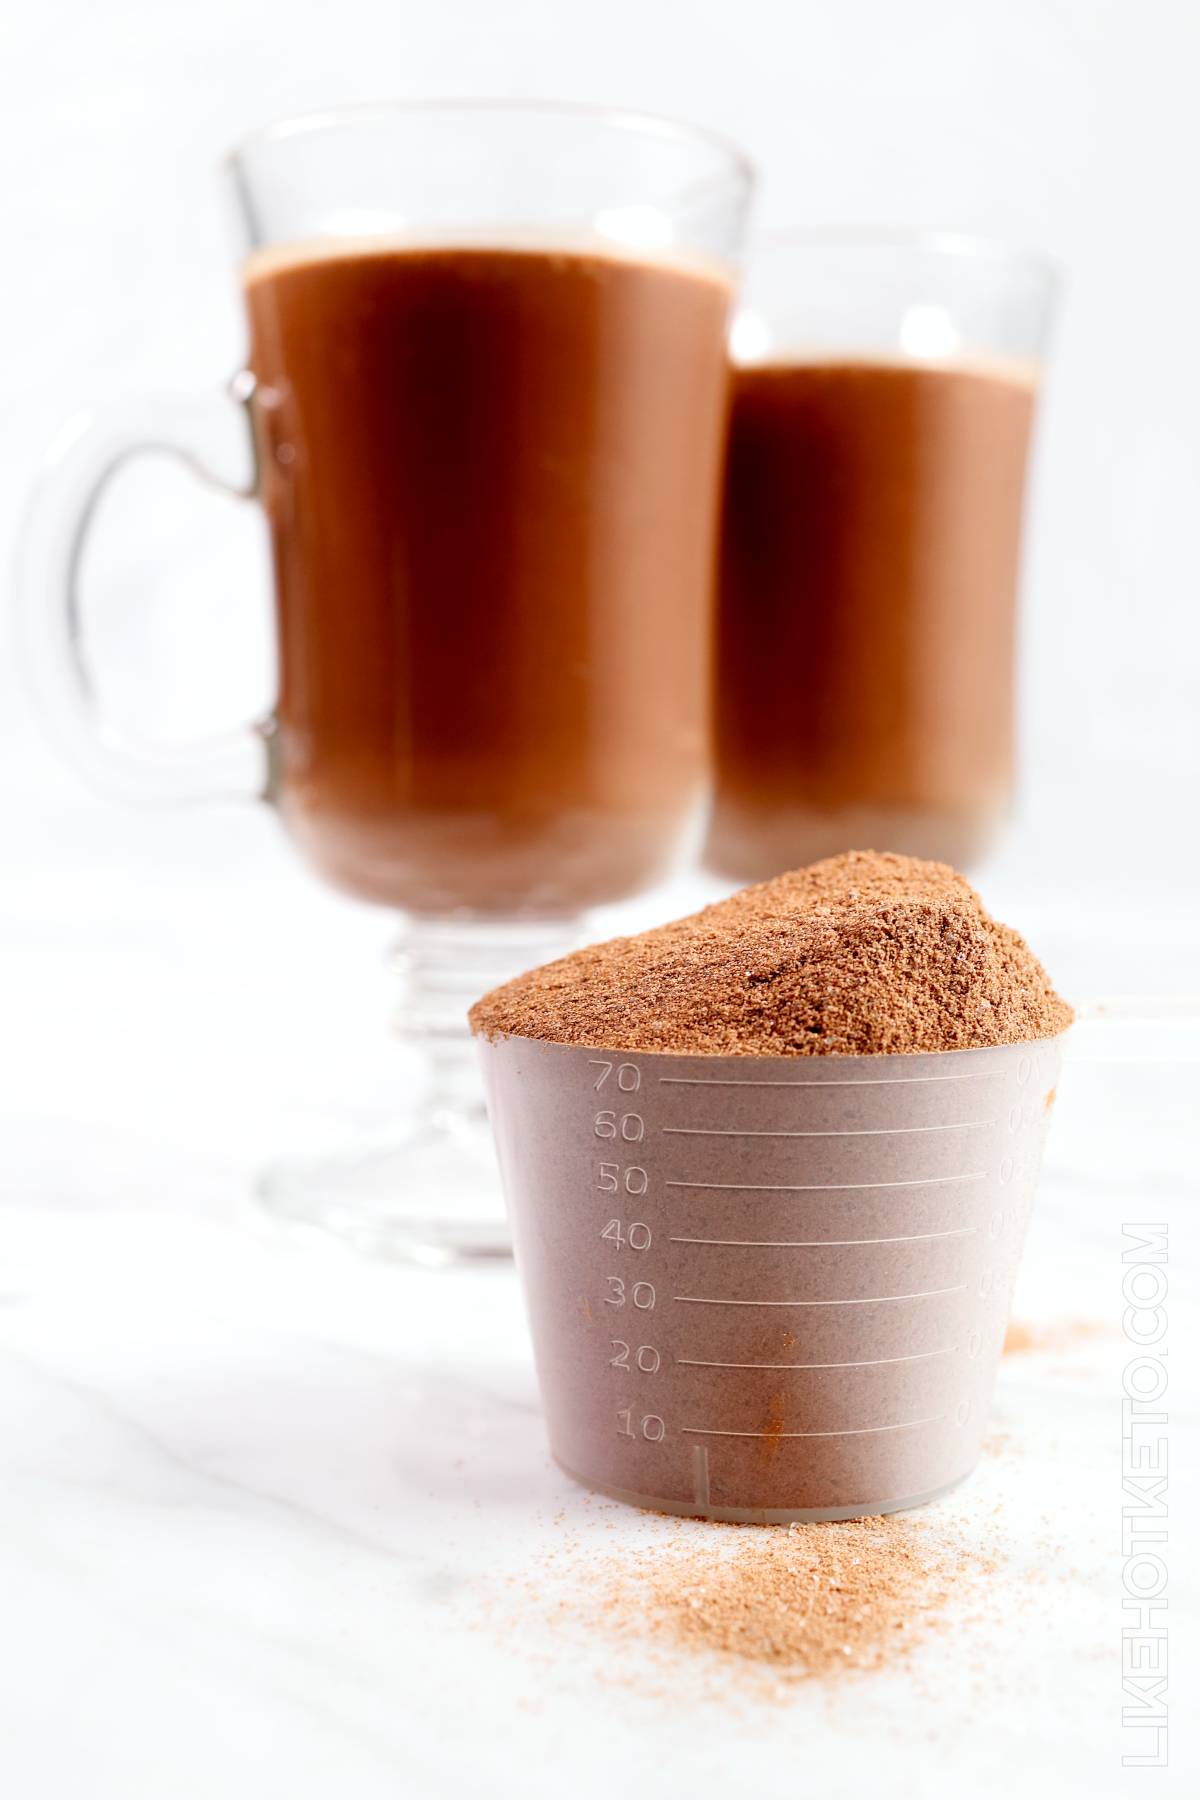 Protein measuring scoop filled with whey protein hot cocoa mix and two mugs of hot cocoa.